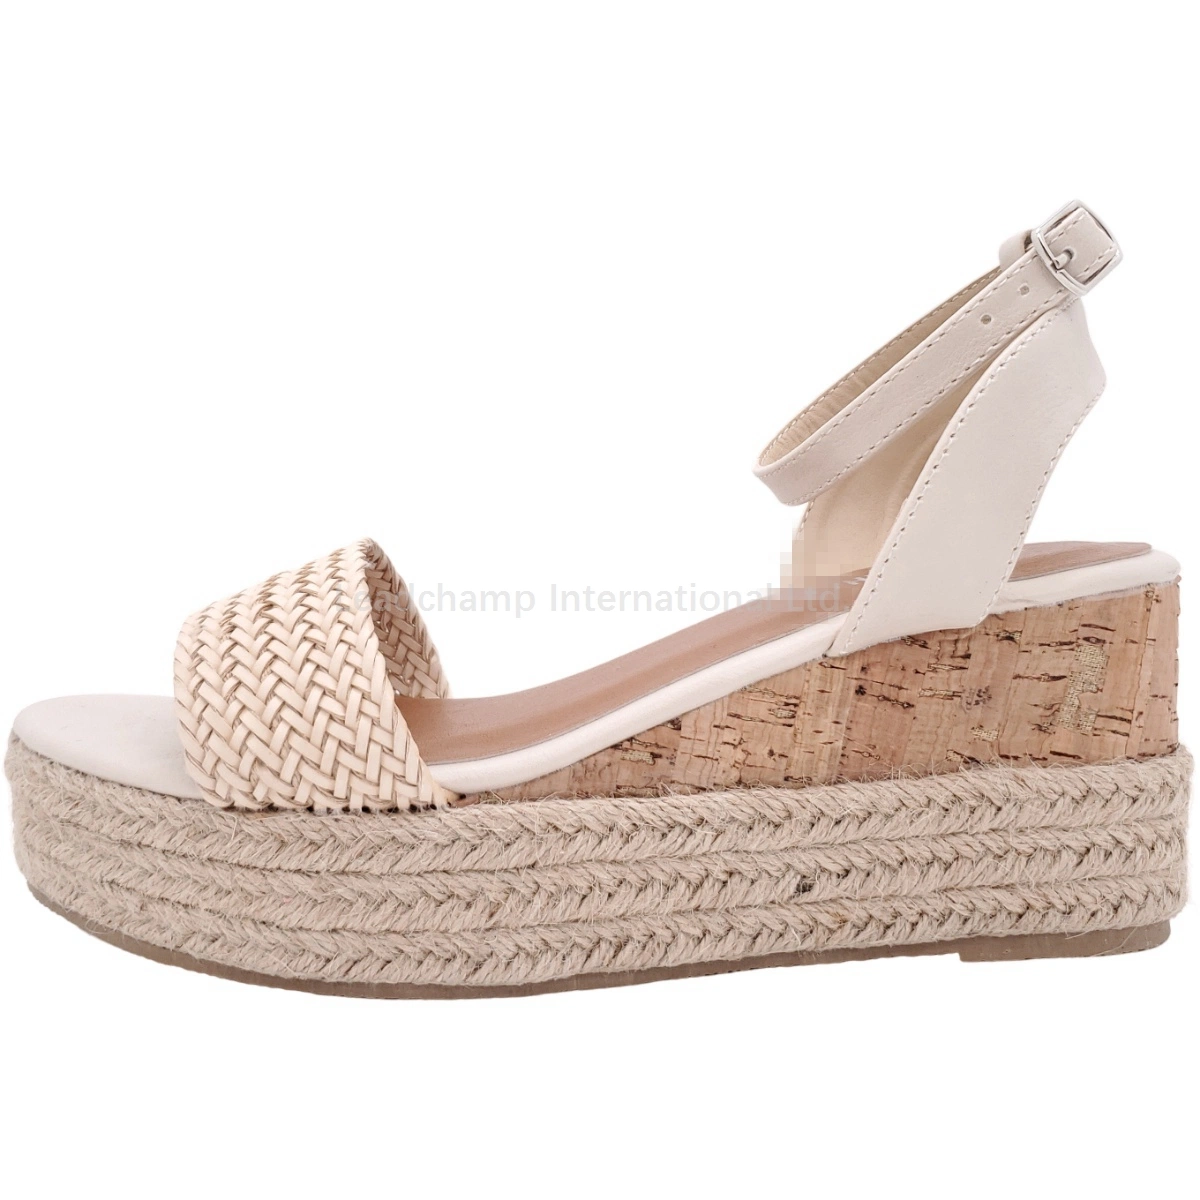 Women Fashion Ankle Strap Sandal Shoe Espadrille Wedge Sandal with Braided Straps